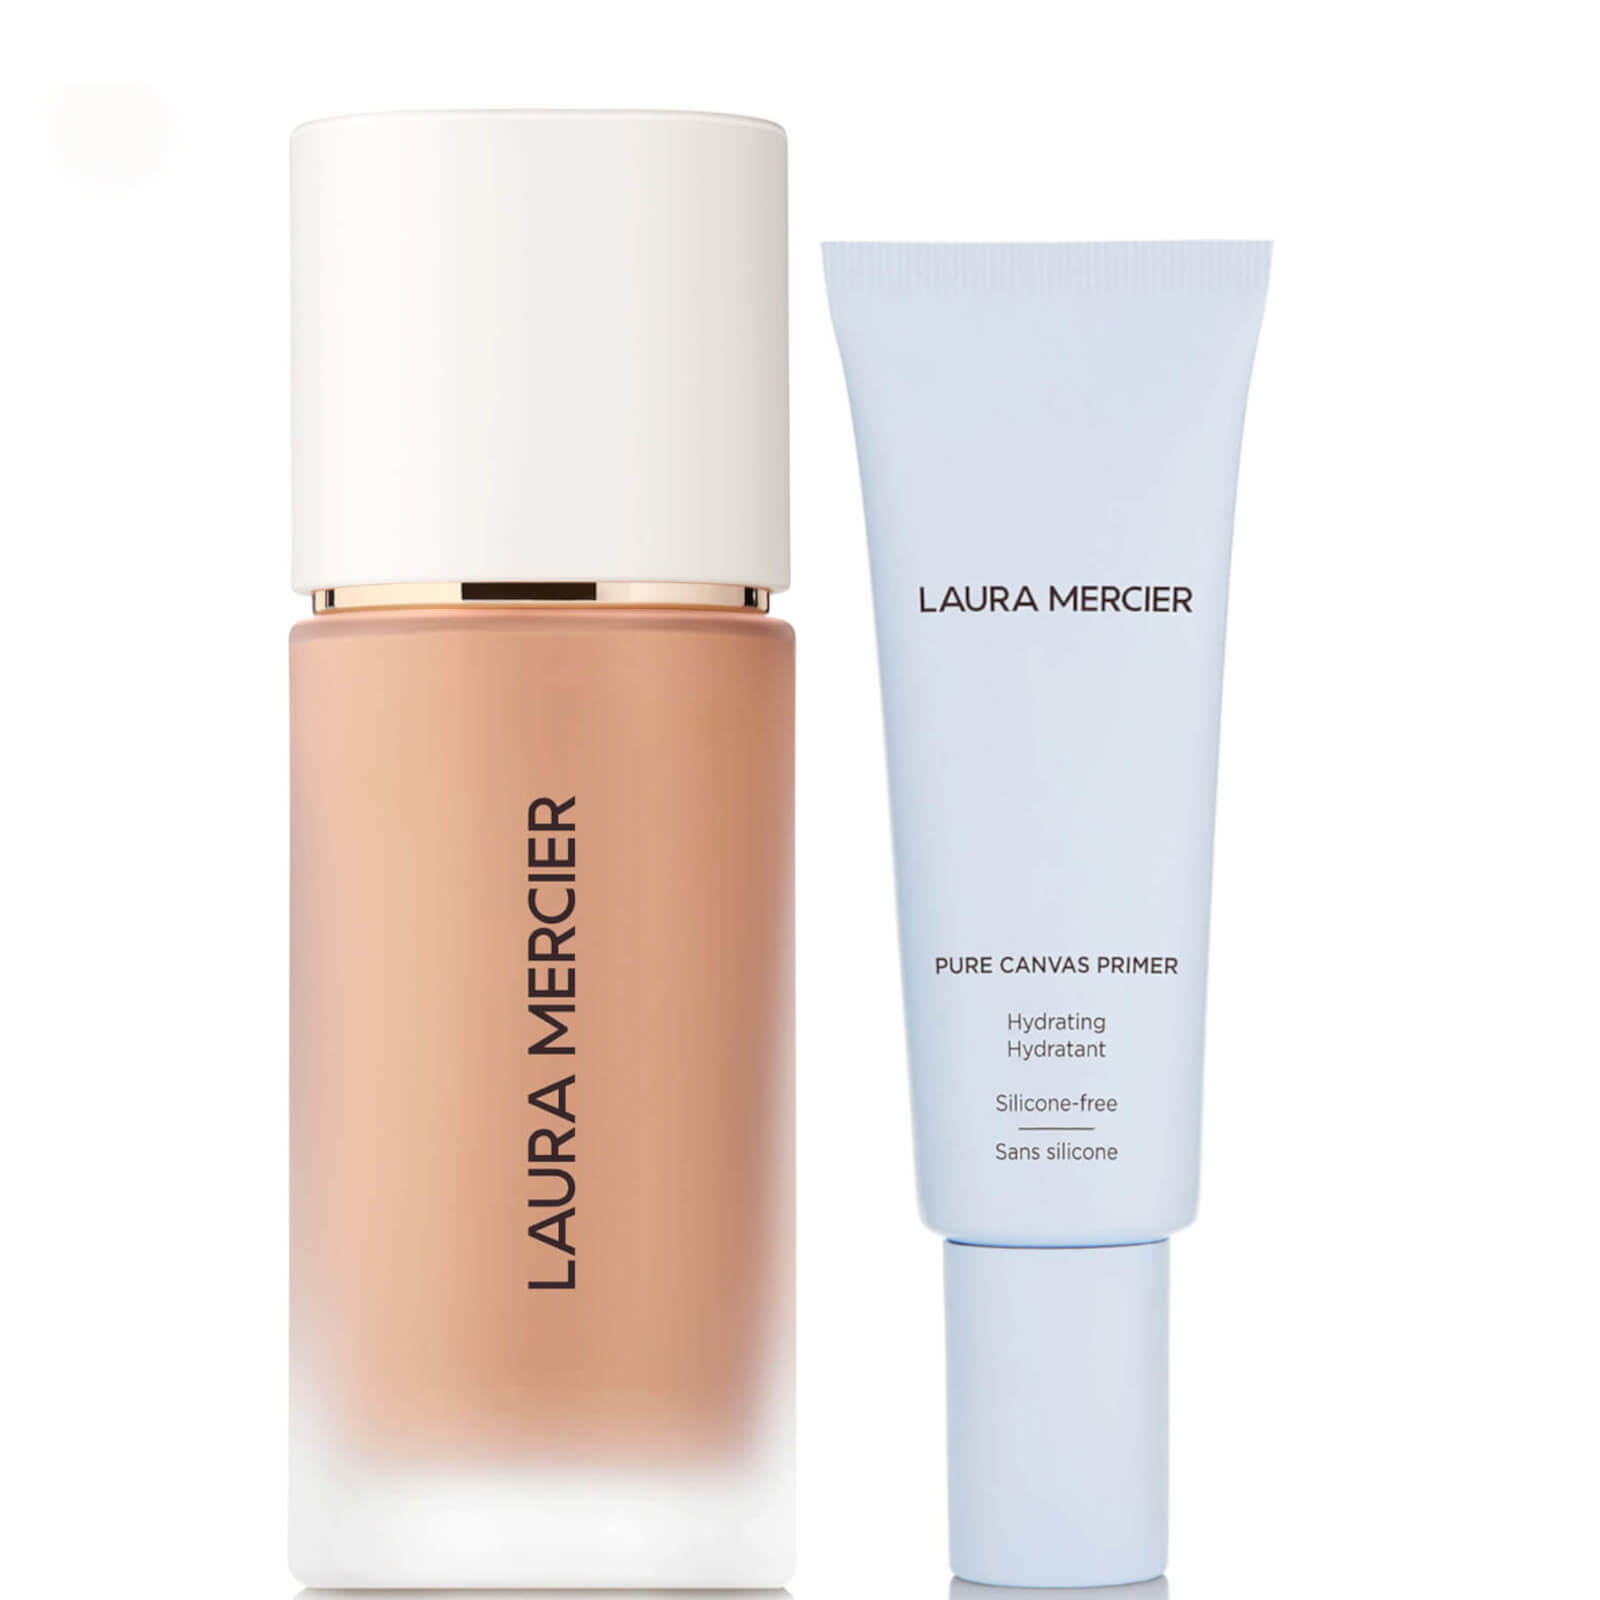 Laura Mercier Real Flawless Foundation and Pure Canvas Hydrating Primer Bundle (Various Shades) - 3C